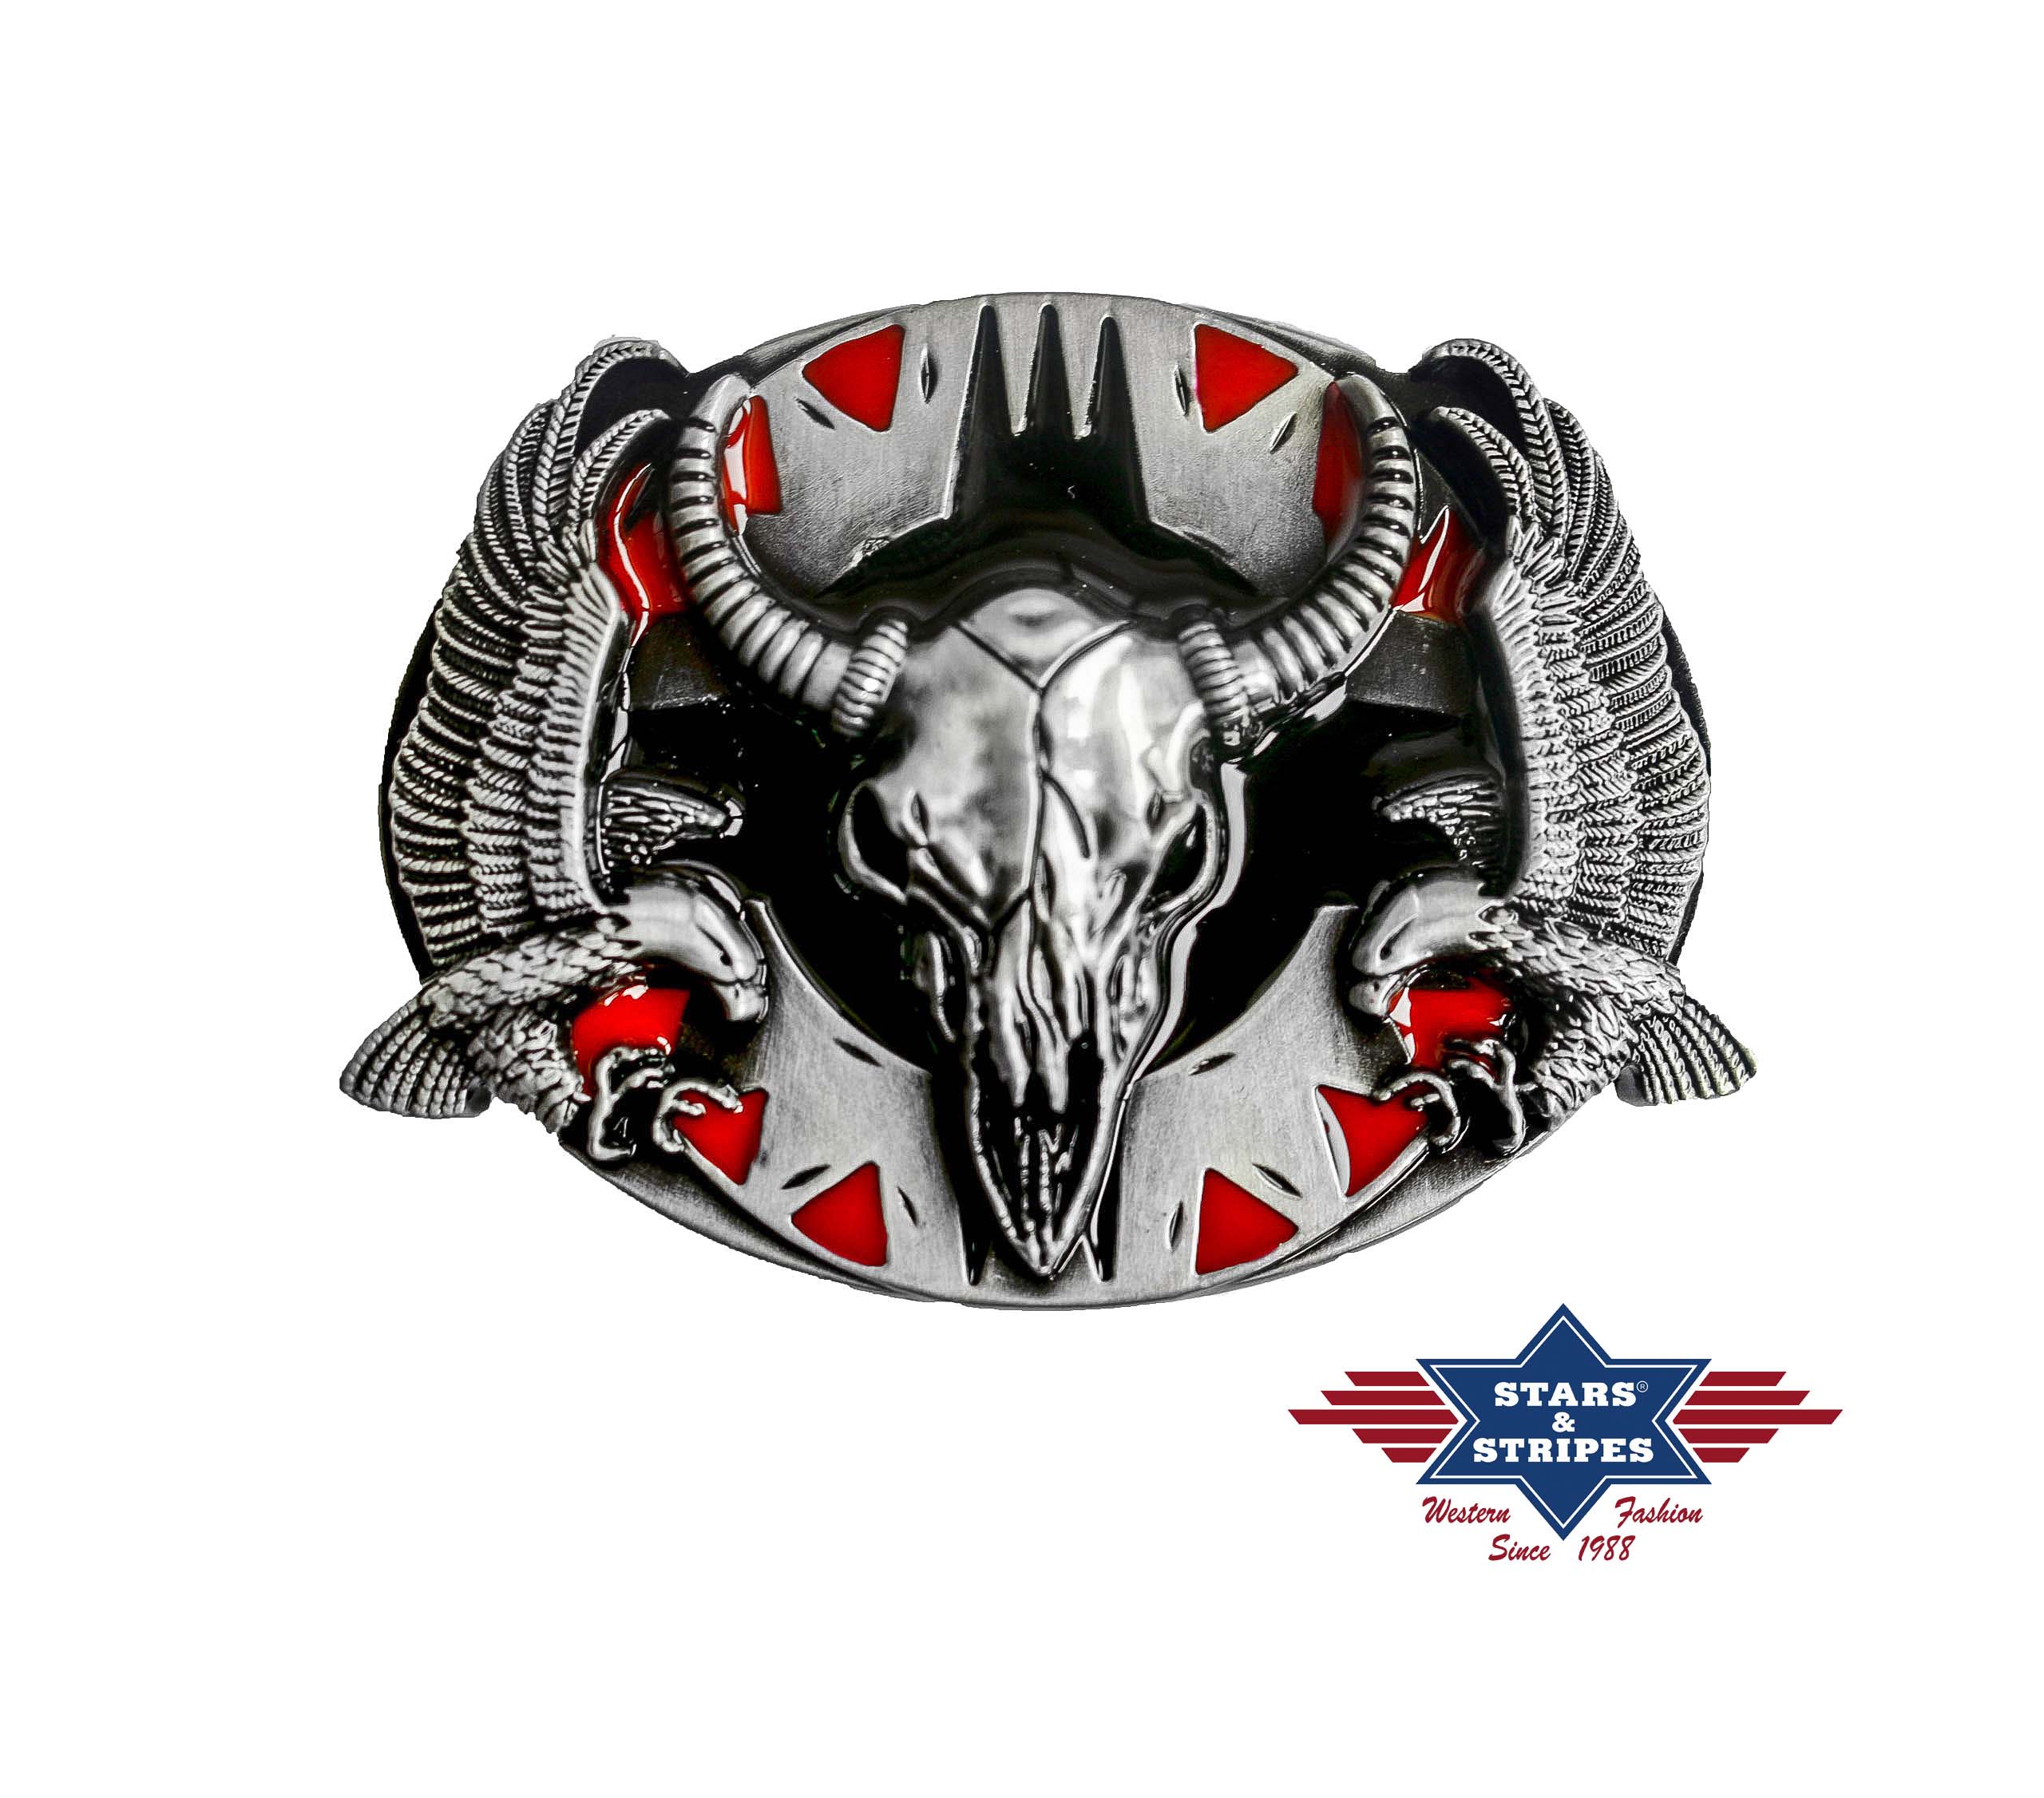 Westernbuckle belt buckle bull head with decorative elements